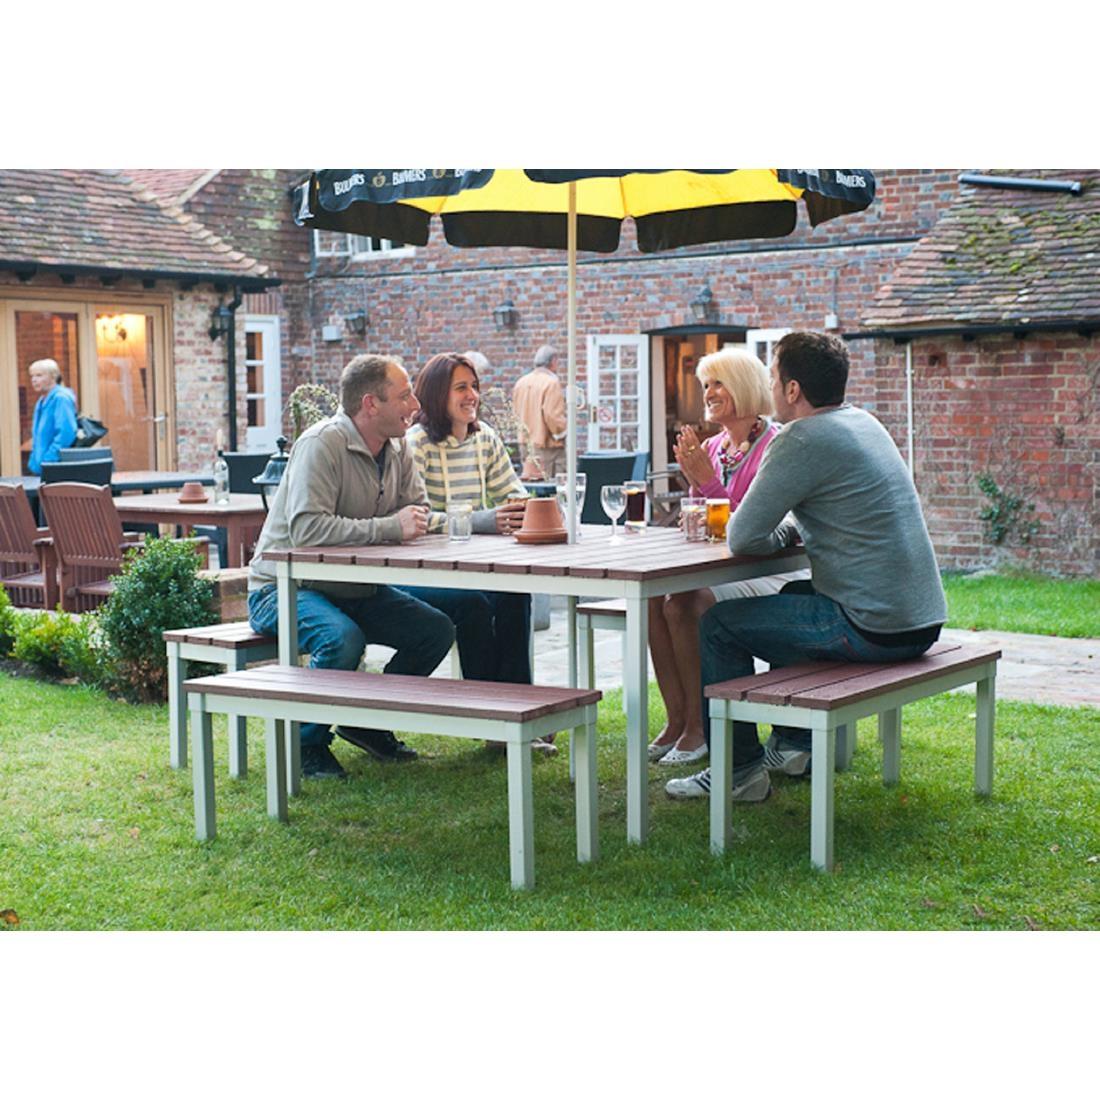 Enviro Square Outdoor Walnut Effect Faux Wood Table 1250mm - CK811  - 4